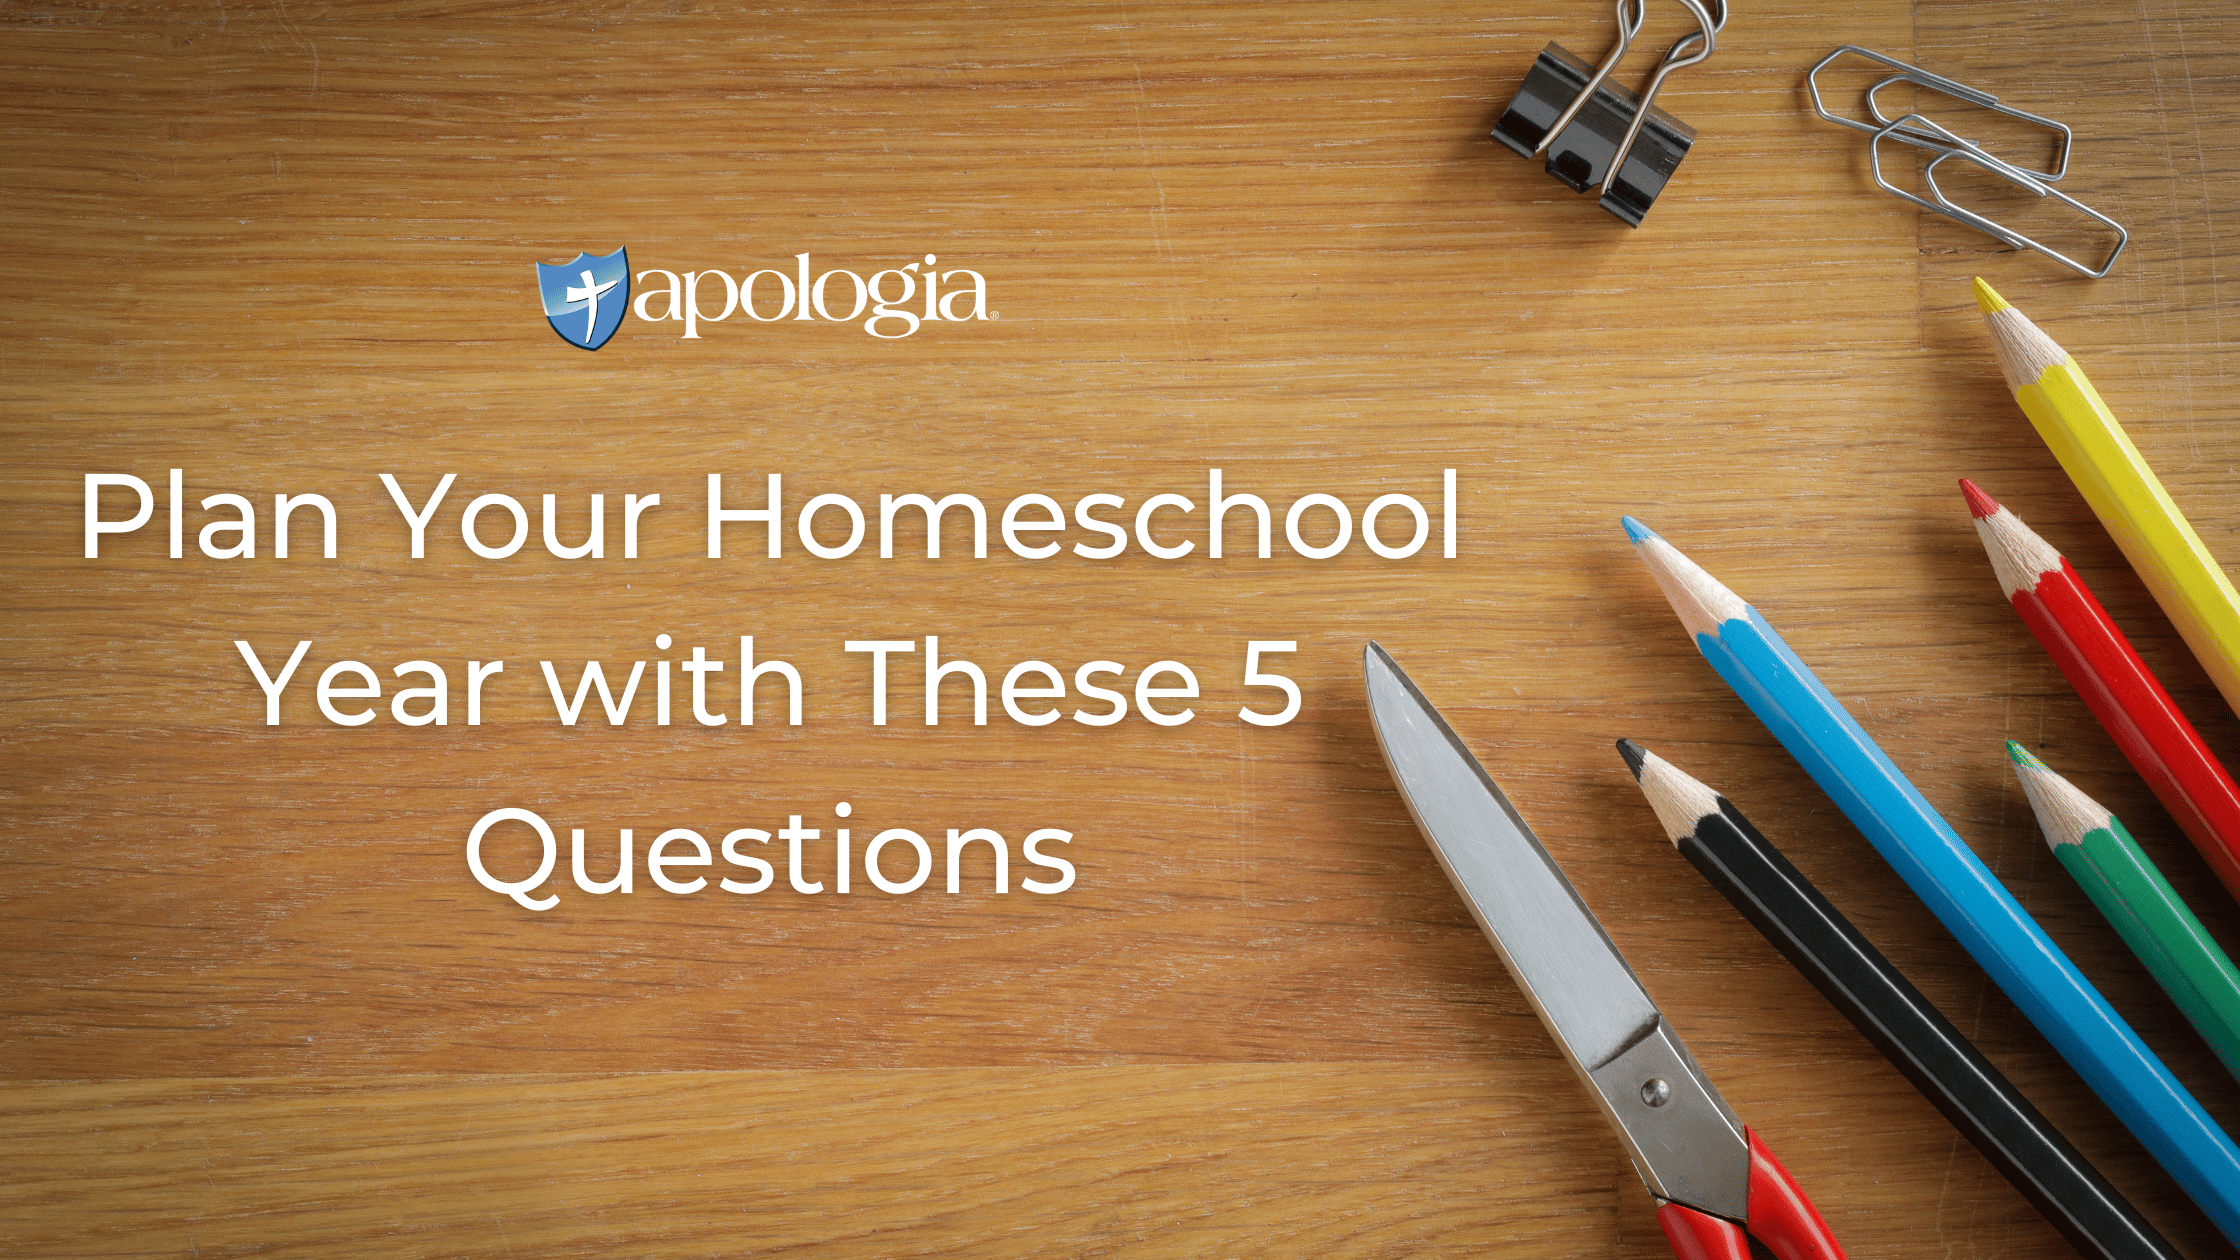 Plan Your Homeschool Year with These 5 Questions